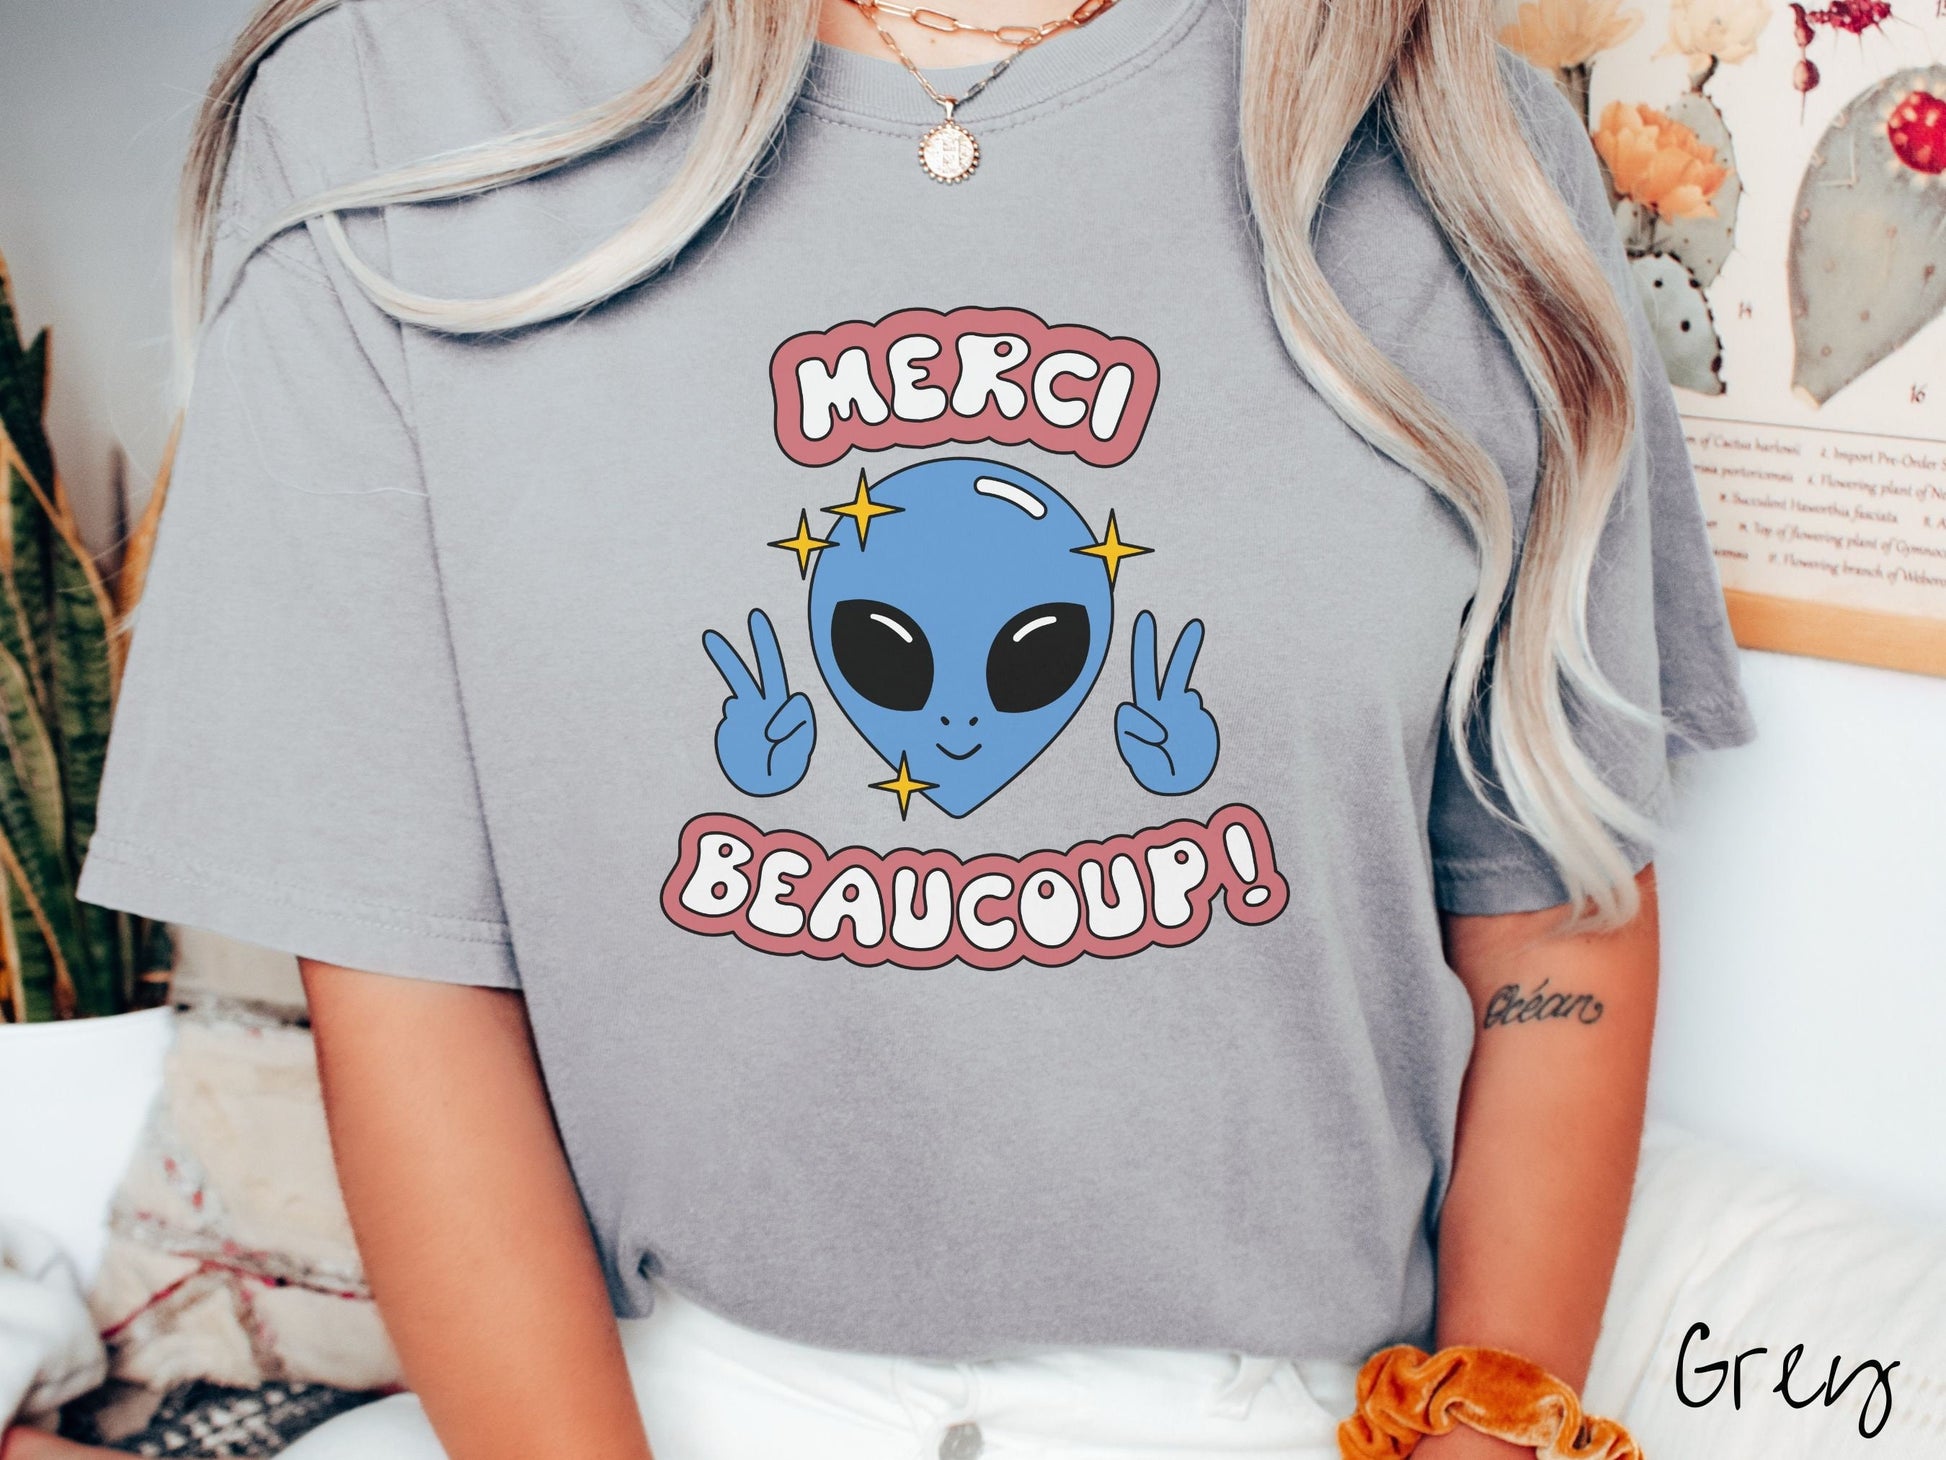 A woman wearing a cute, vintage grey colored Comfort Colors shirt with the text Merci Beaucoup! in white and maroon colored font. In between that is a blue alien with large black eyes smiling and holding up two peace signs.